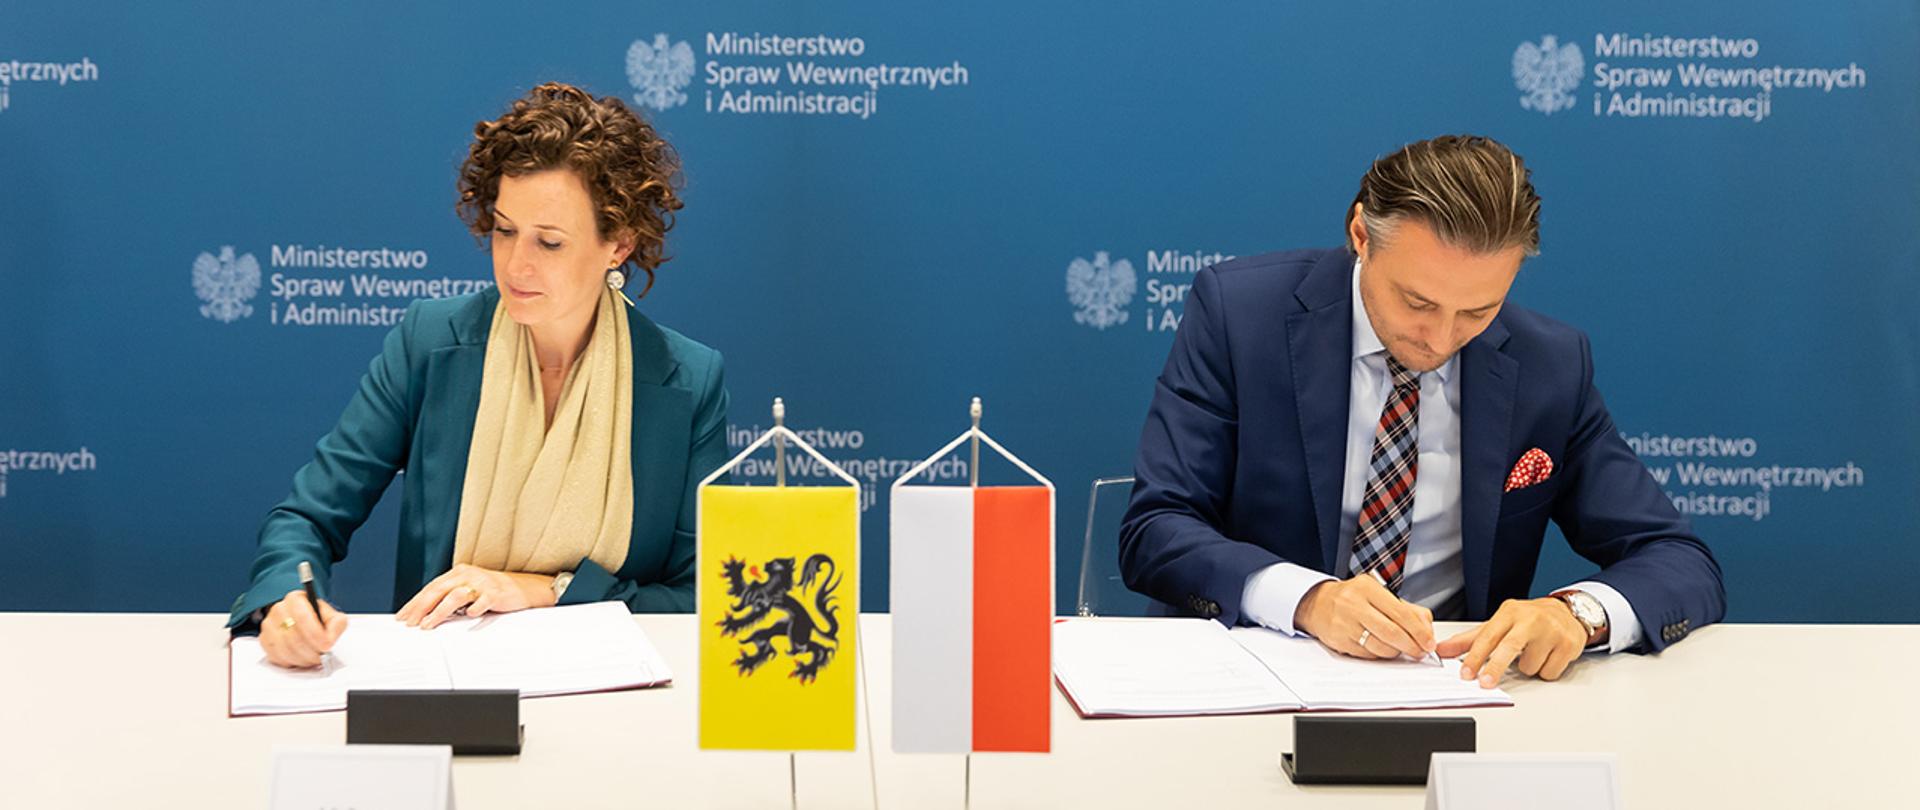 During the meeting, a new cooperation agreement between Poland and the Government of Flanders was signed.